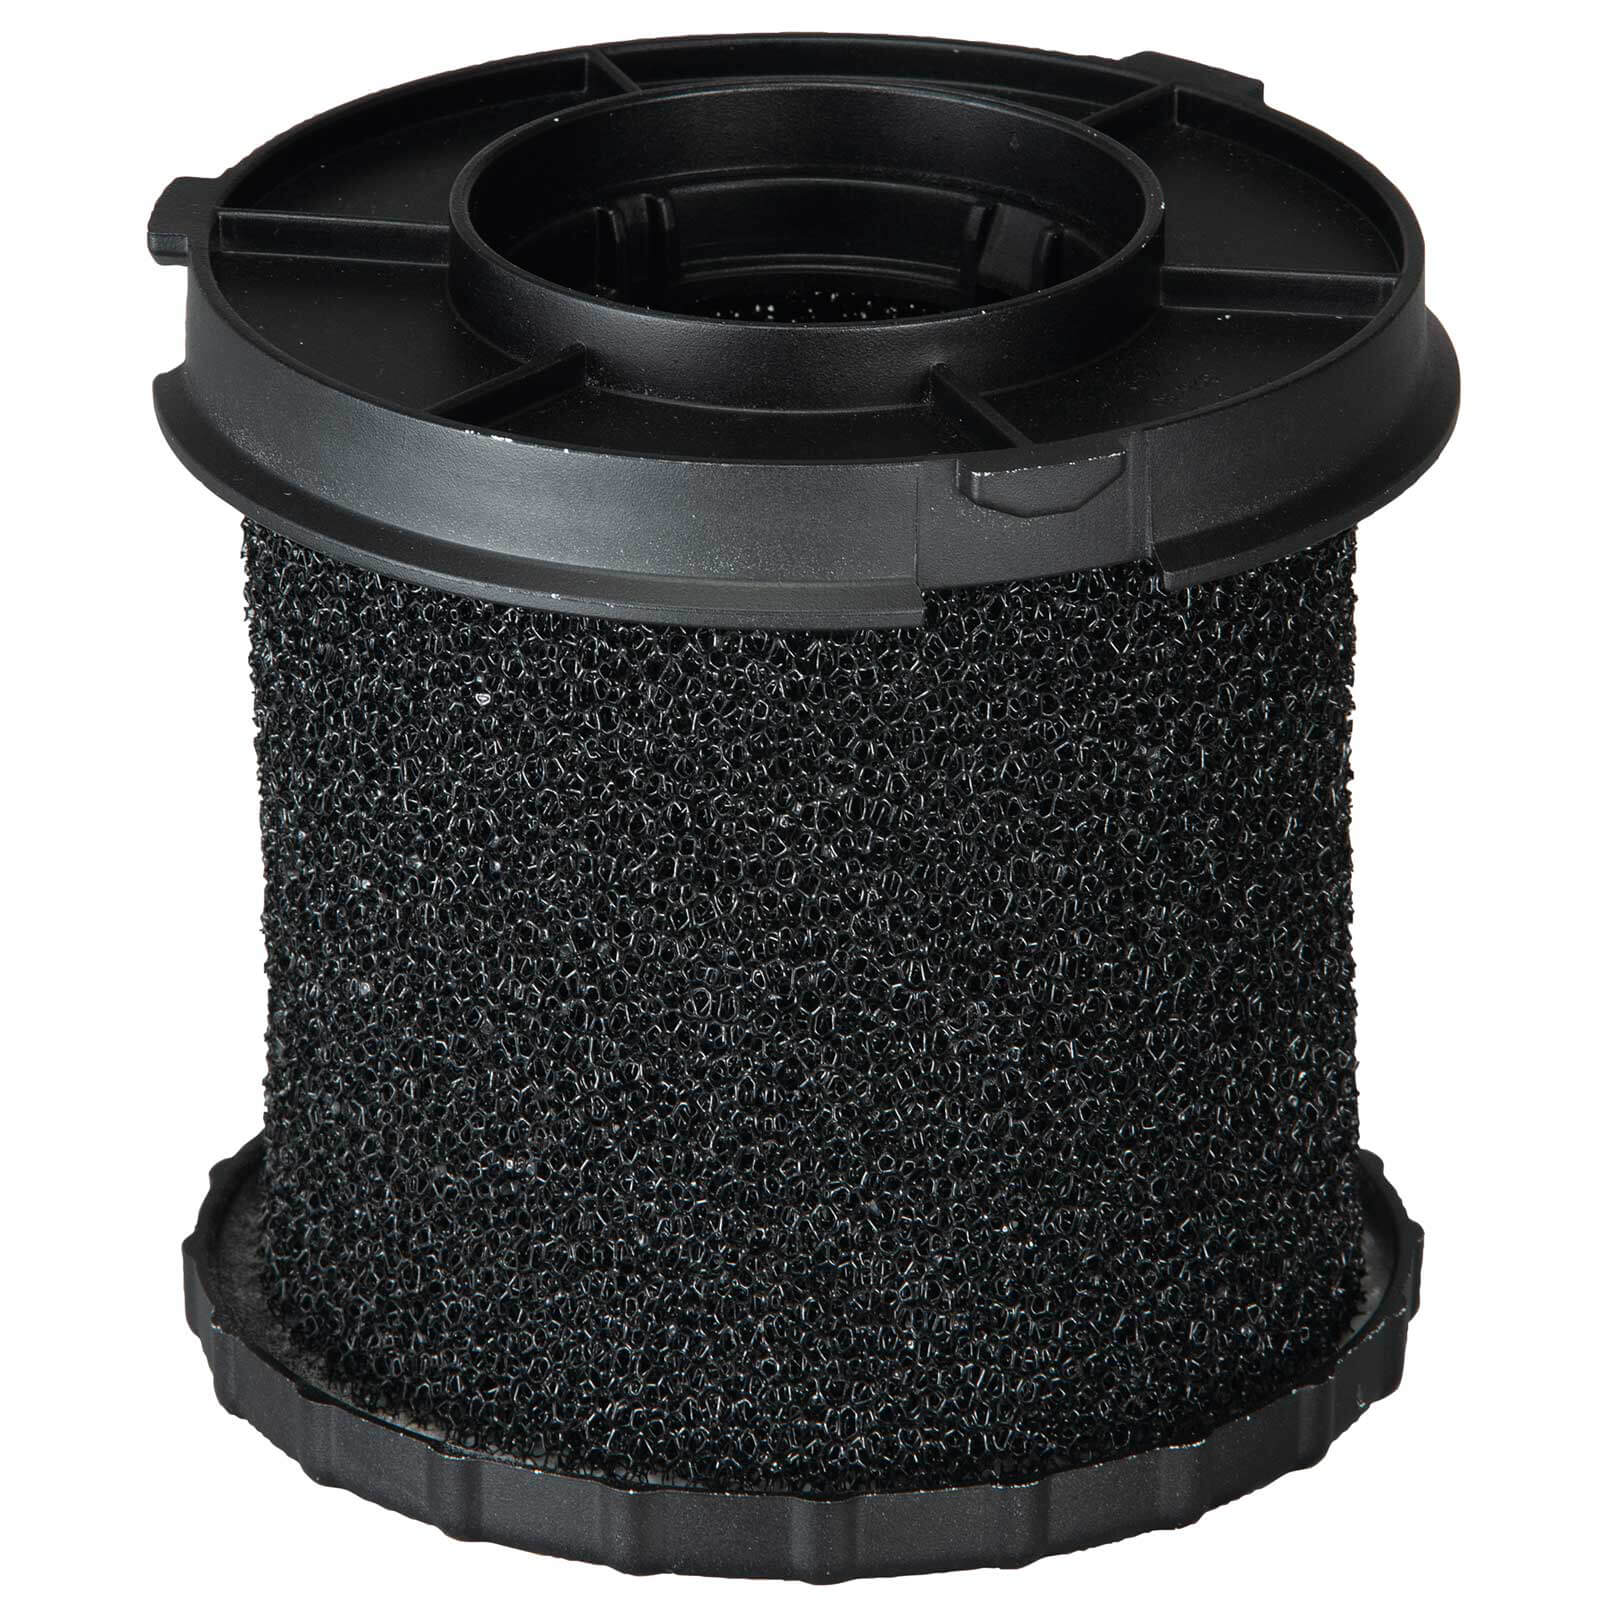 Image of Makita Wet Filter For DVC750L Dust Extractor